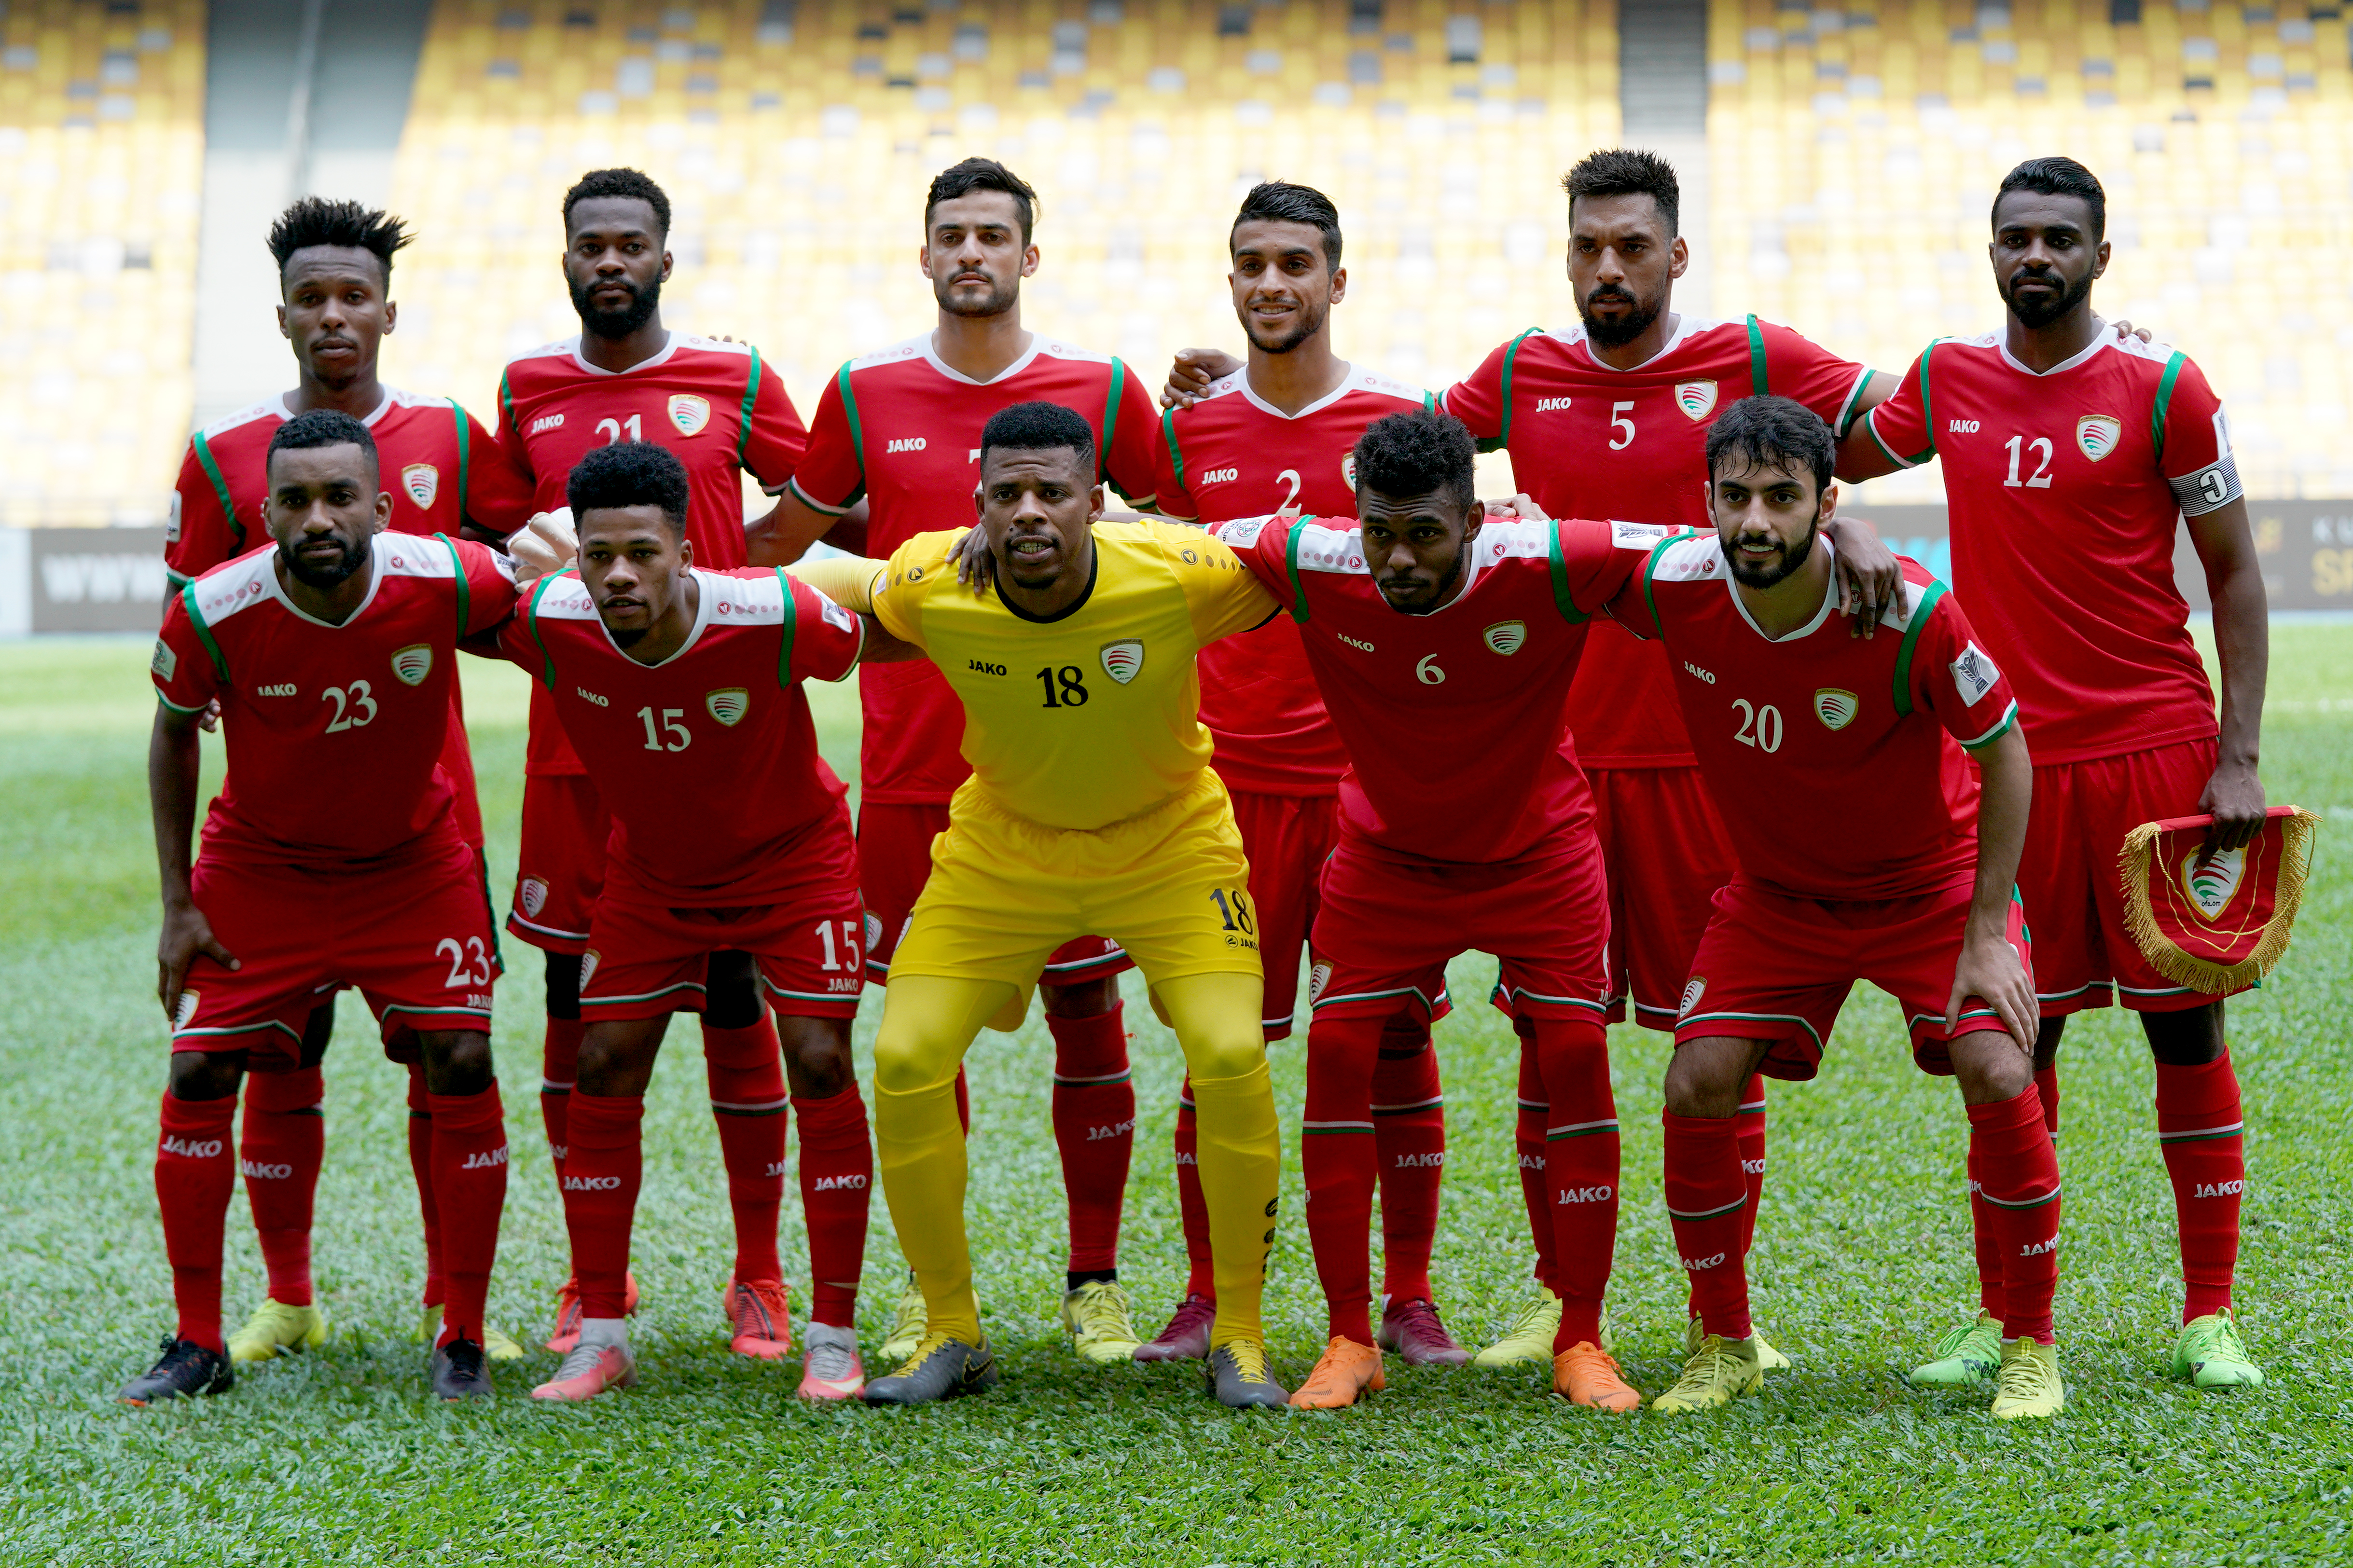 FIFA World Cup Qualifiers | Know Your Opponent - Oman